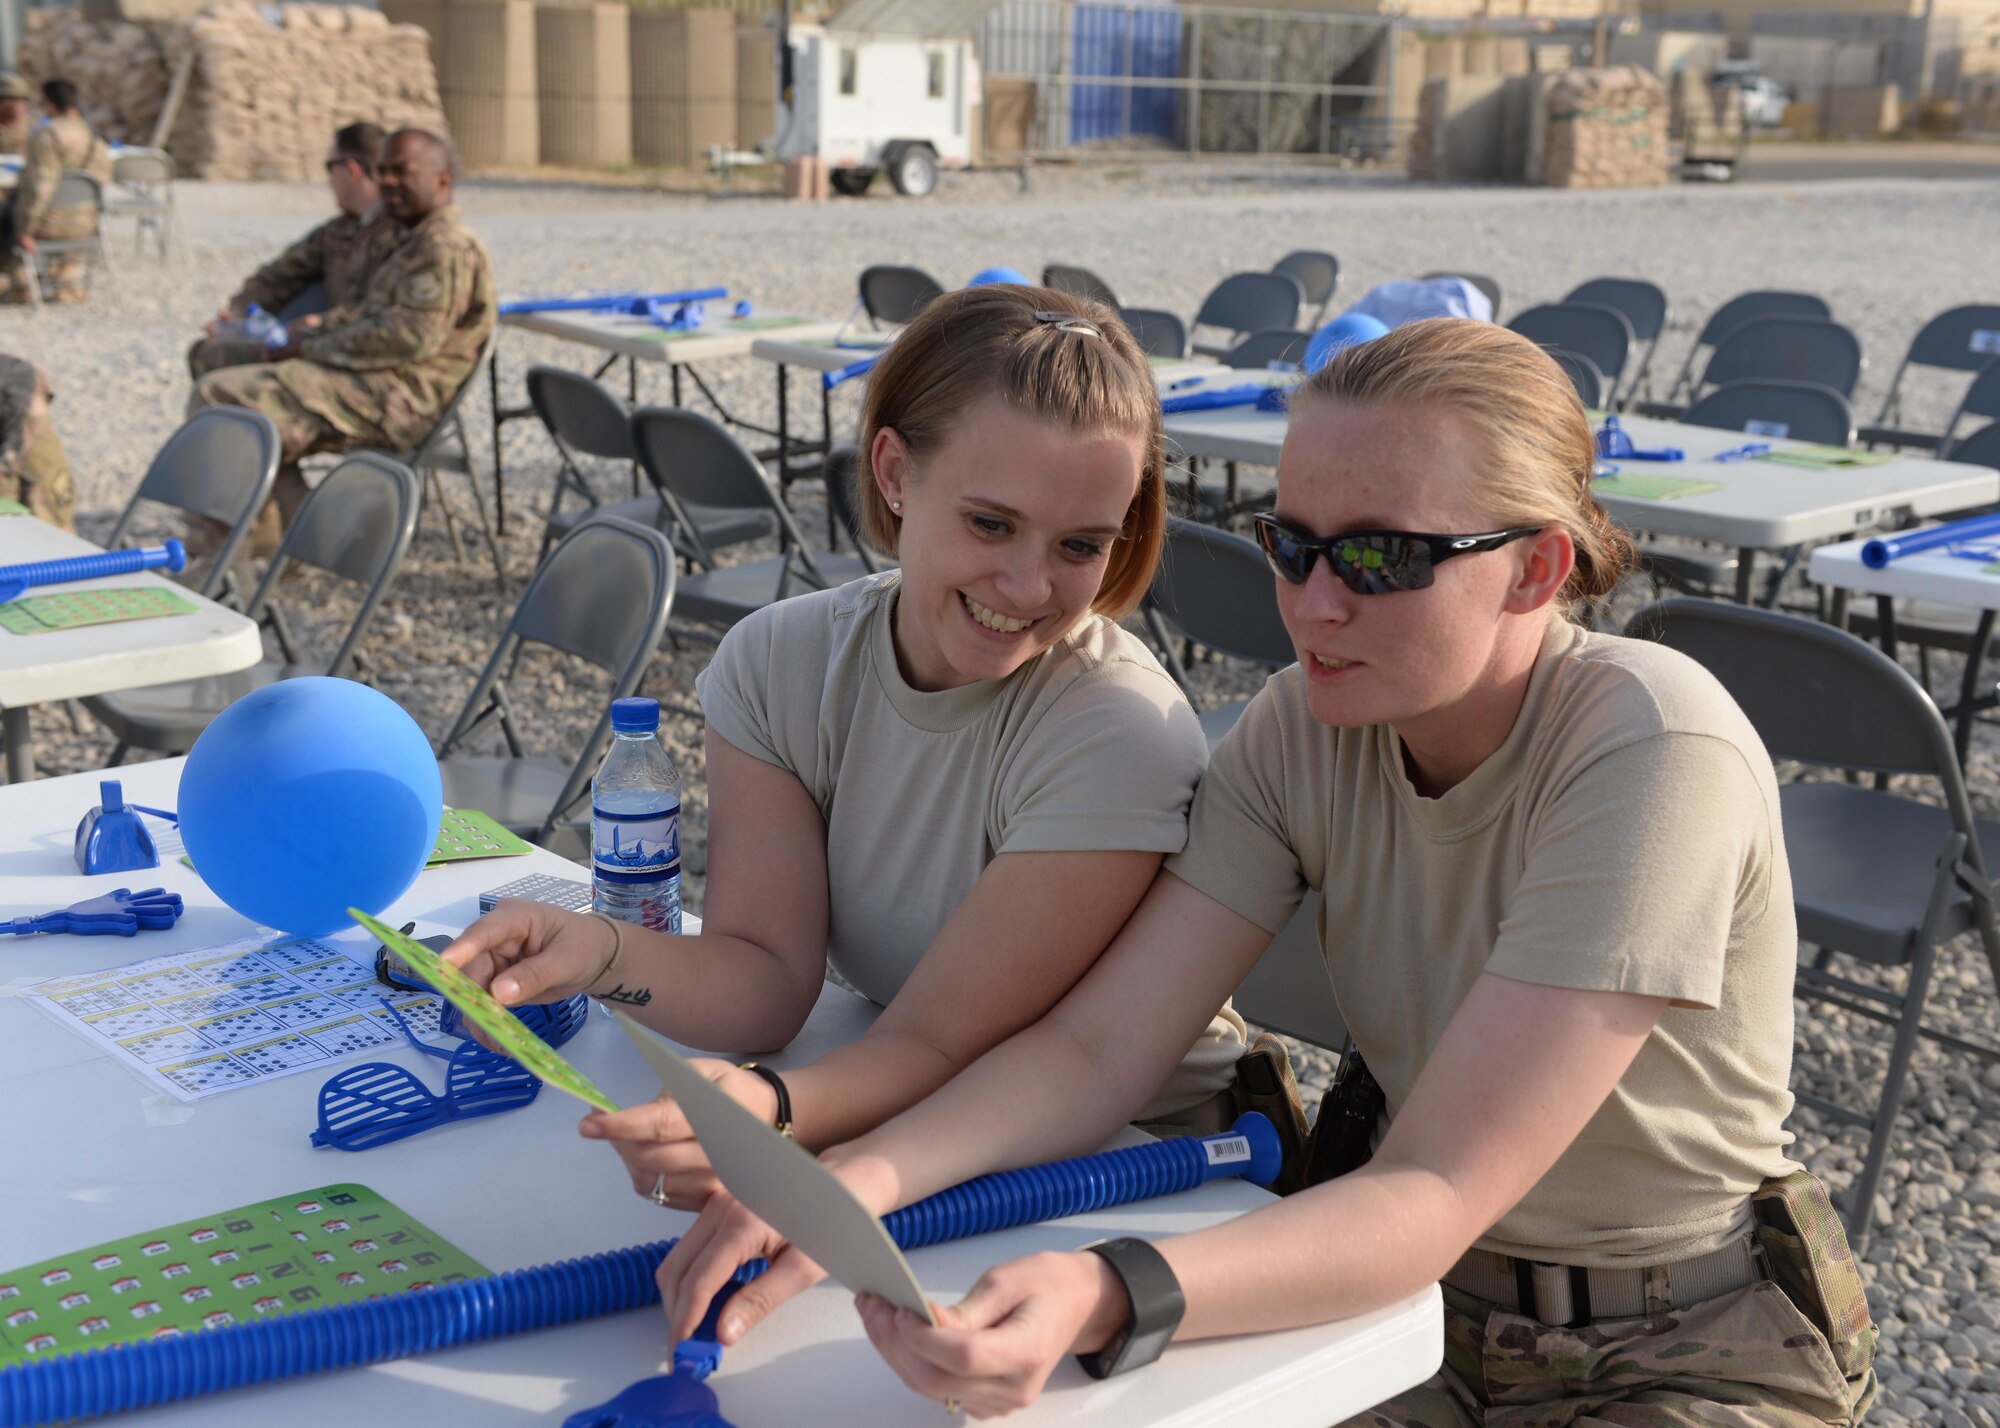 U.S. Air Force Master Sgt. Natasha Hoglund, left), and Staff Sgt. Angel Kozar, 455th Air Expeditionary Wing legal office, play a game of bingo during a block party held in honor of the Air Force’s 68th birthday Sept. 18, 2015, at Bagram Airfield, Afghanistan. The block party which was hosted by the Armed Forces Committed to Excellence council, the 455th Force Support Squadron and other private organizations featured games, food and a traditional AF cake cutting ceremony. (U.S. Air Force photo by Senior Airman Cierra Presentado/Released)